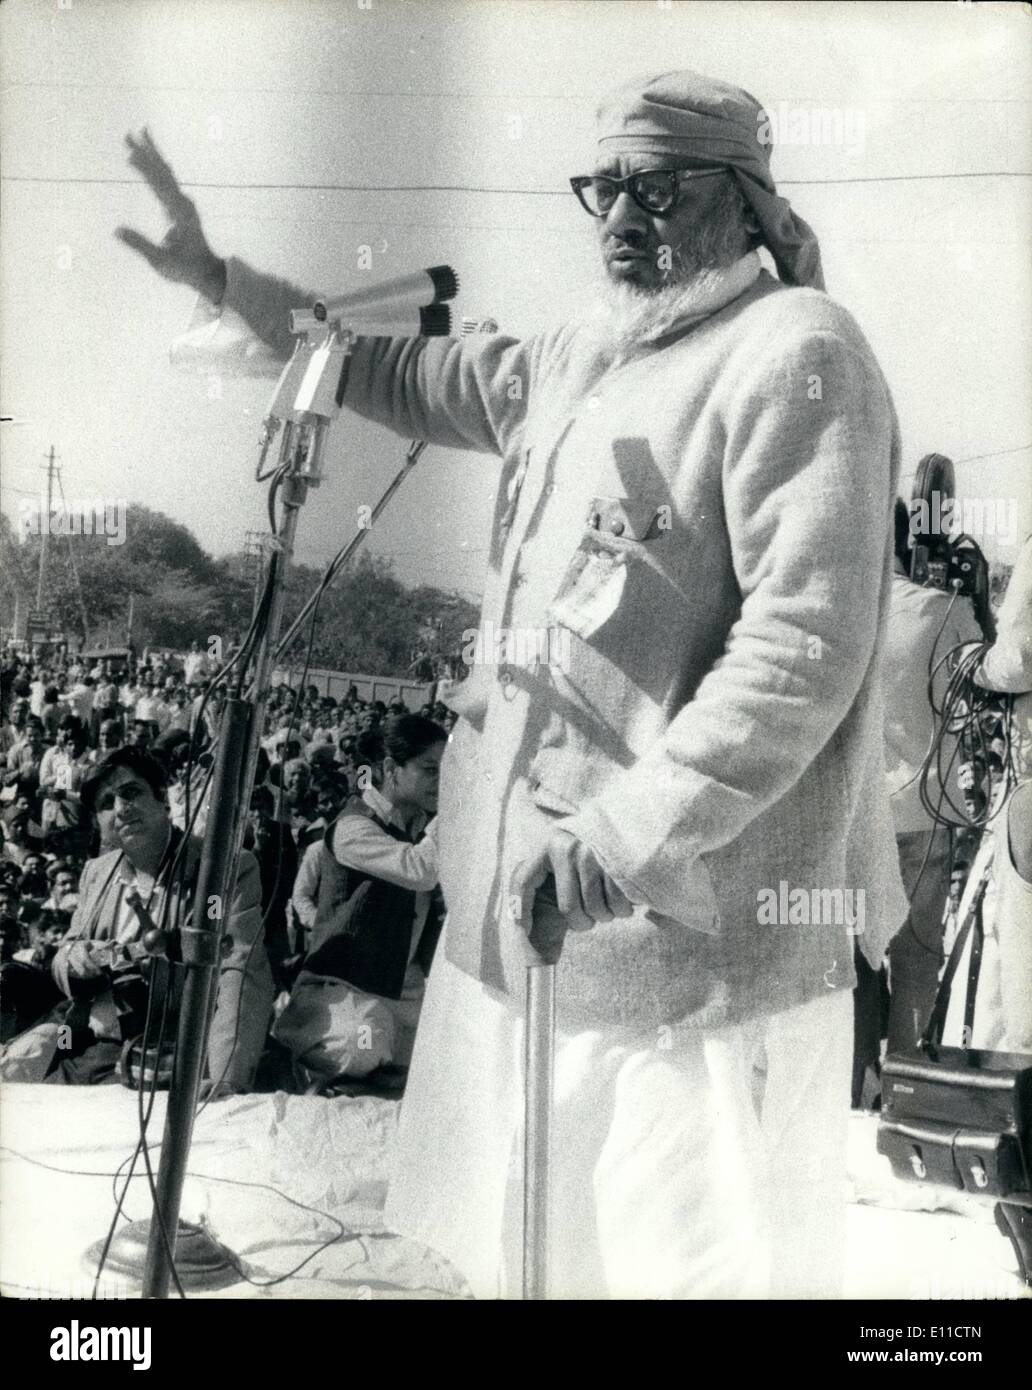 Mar. 03, 1977 - INDIAN ELECTION RALLY BY MR RAJ MARAIN IN DELHI PHOTO SHOWS: The Janata Party stalwart MR RAJ MARAIN seen addressing a mass Rally in New Delhi for the Indian election which takes place this month. Stock Photo